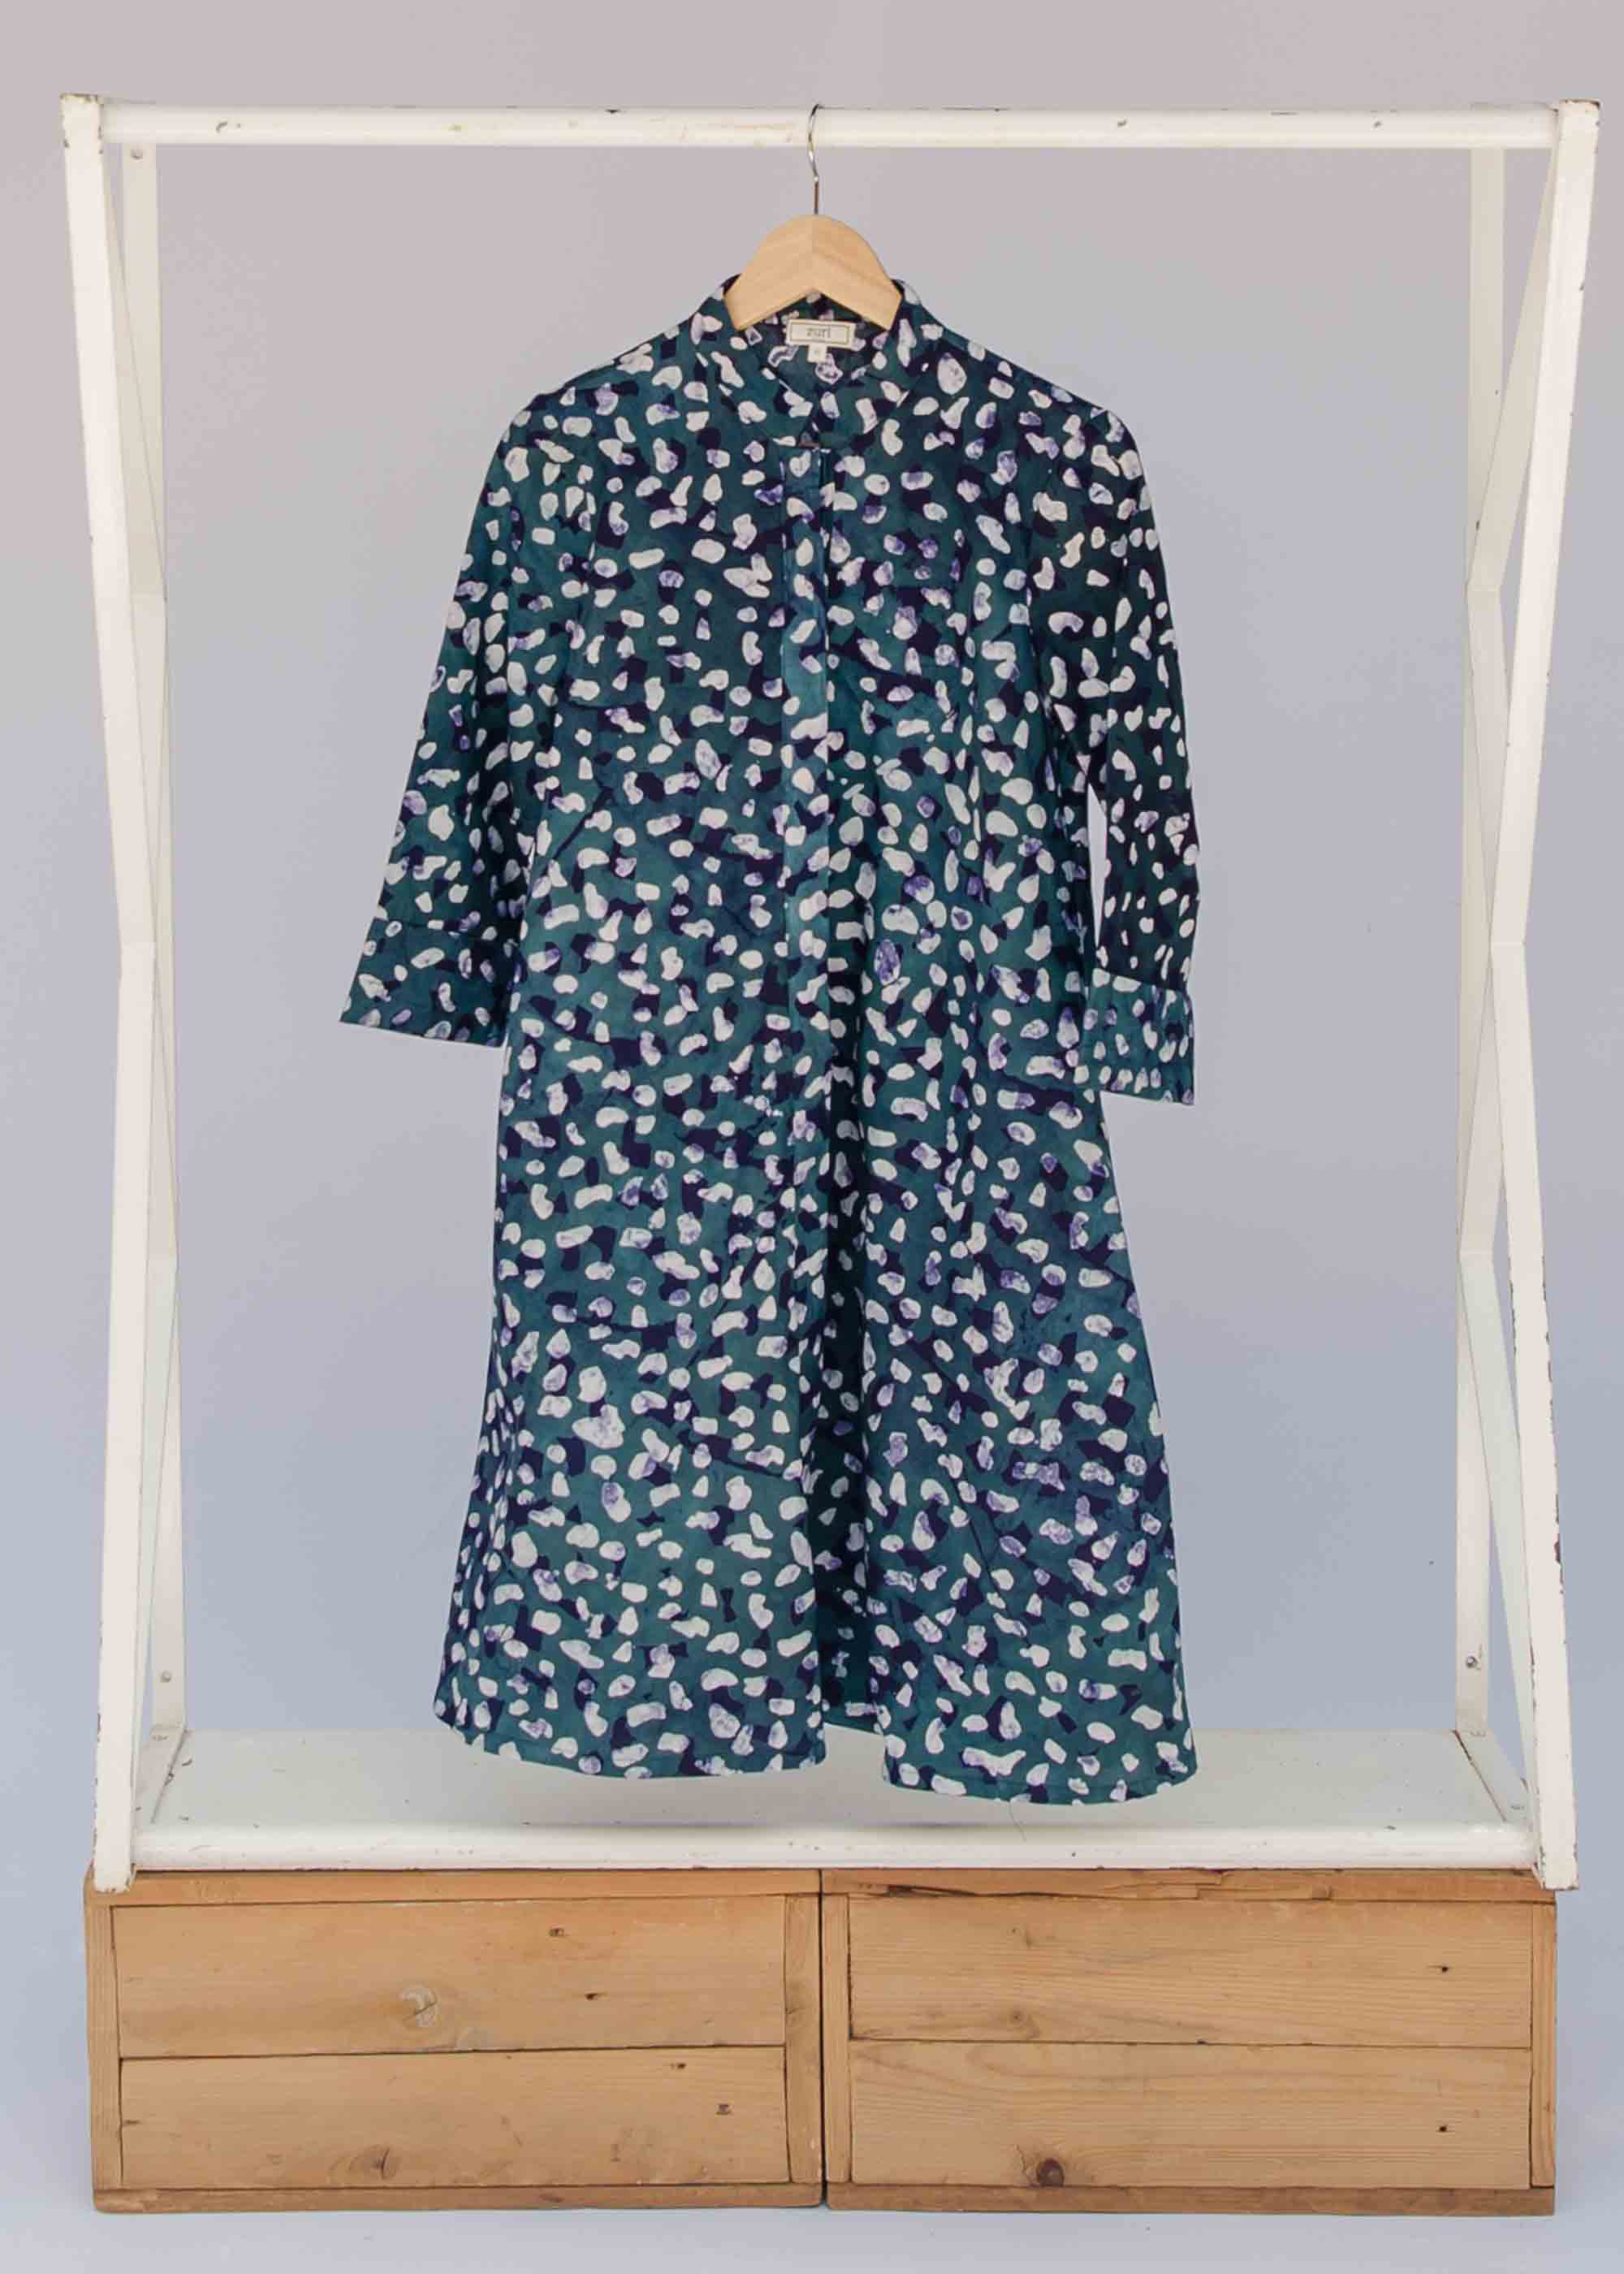 display of a green, white and navy polka dot design dress